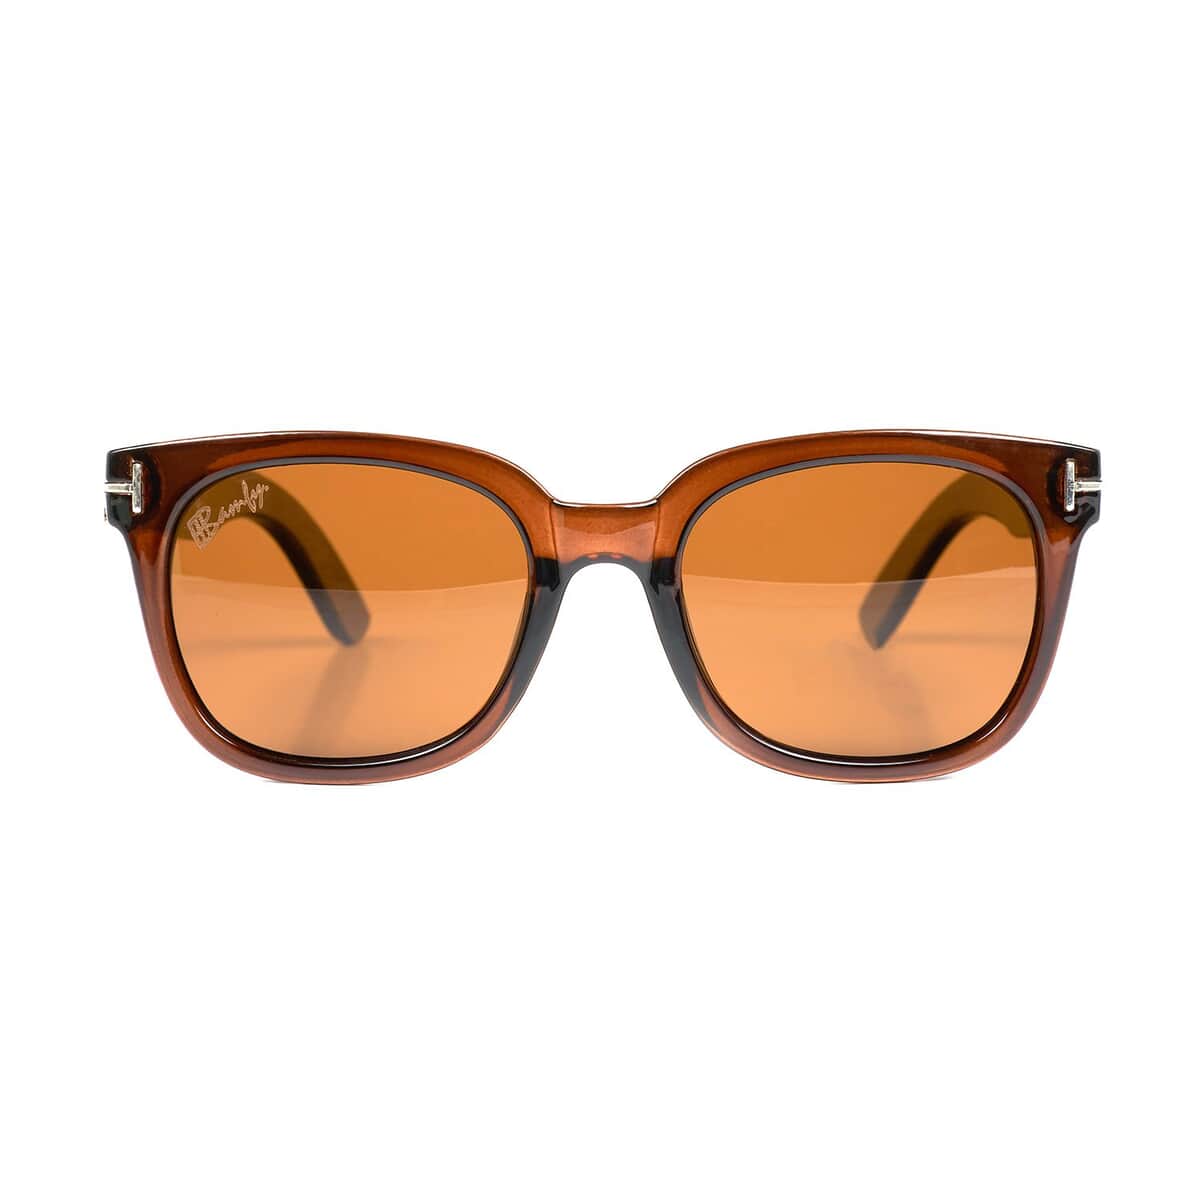 Bamfy Linda Vista UV400 Sunglasses with Bamboo Legs and Case -Brownout image number 0